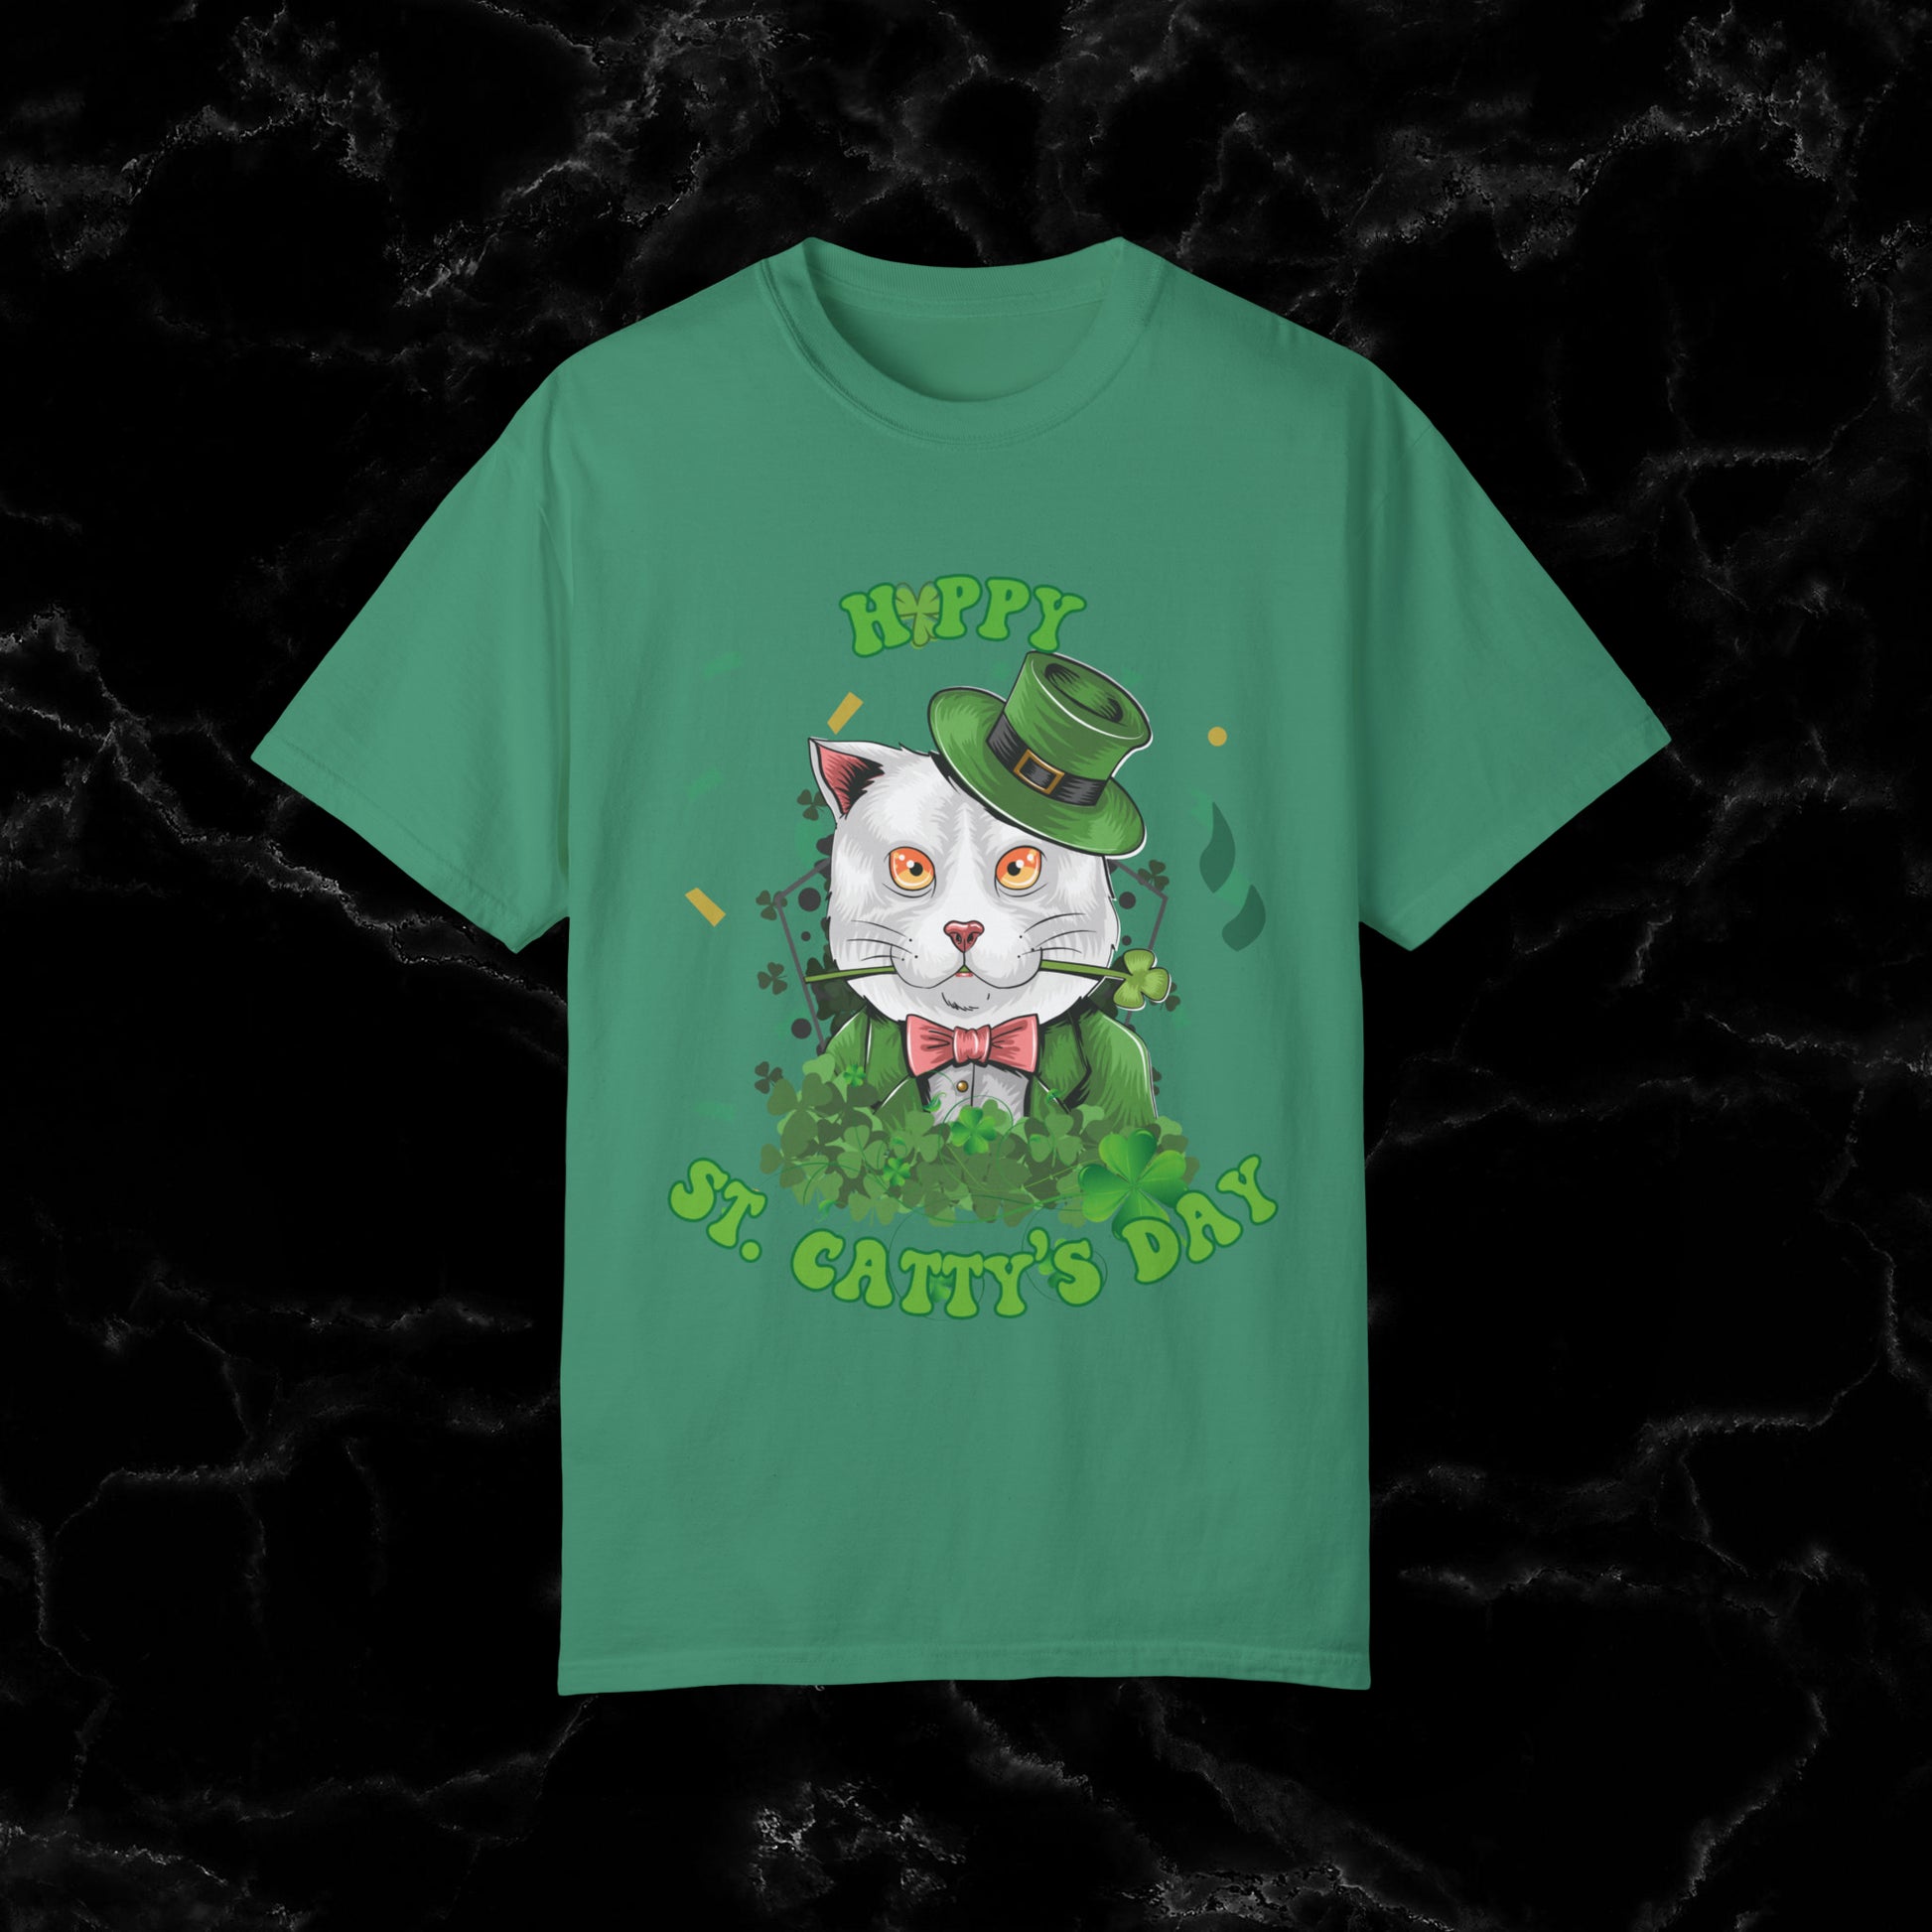 Happy St. Catty's Day Funny St. Patrick's Day Comfort Colors T-Shirt - St. Paddy's Day Shirt for Cat Lover St. Patty's Day Fun T-Shirt Grass 2XL 